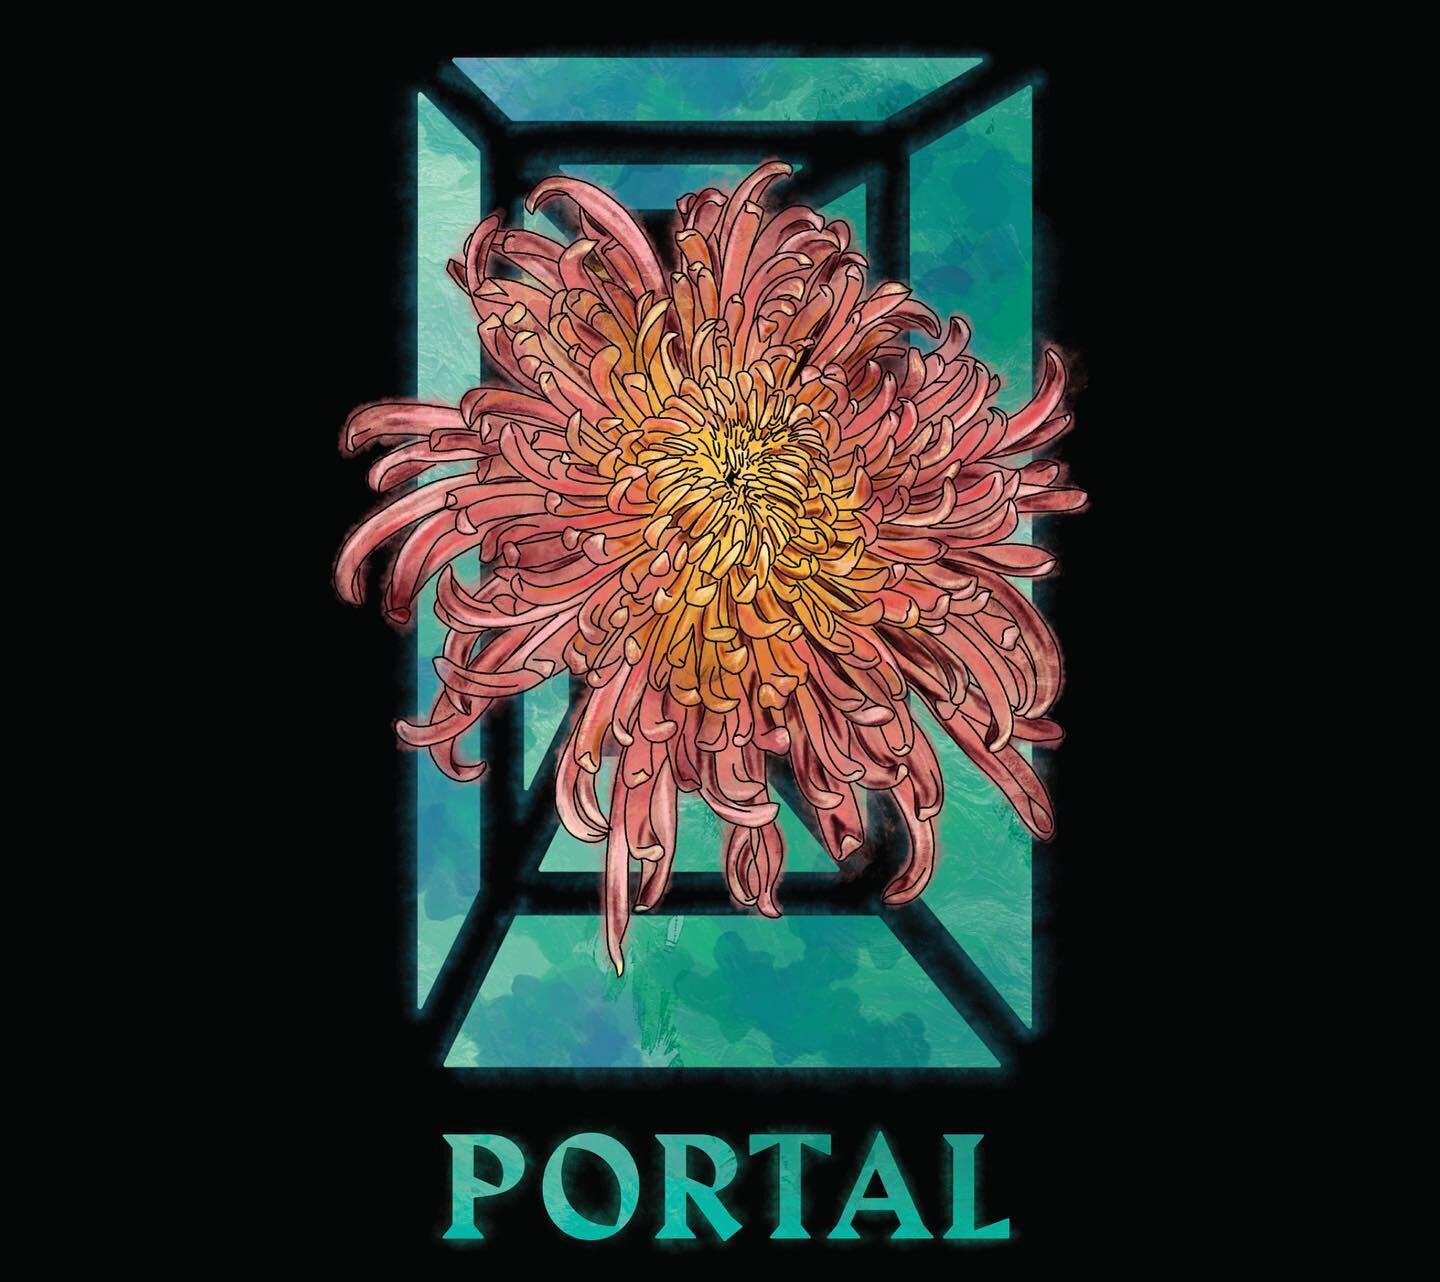 The new @portalcocktails menu is Volume 3: ESSENCE, and it&rsquo;s an *experience*. There&rsquo;s poetry in there from the Ermans, inspired by Ram Dass and Terence McKenna. But there&rsquo;s a sense of becoming, of existing and reconnecting with the 